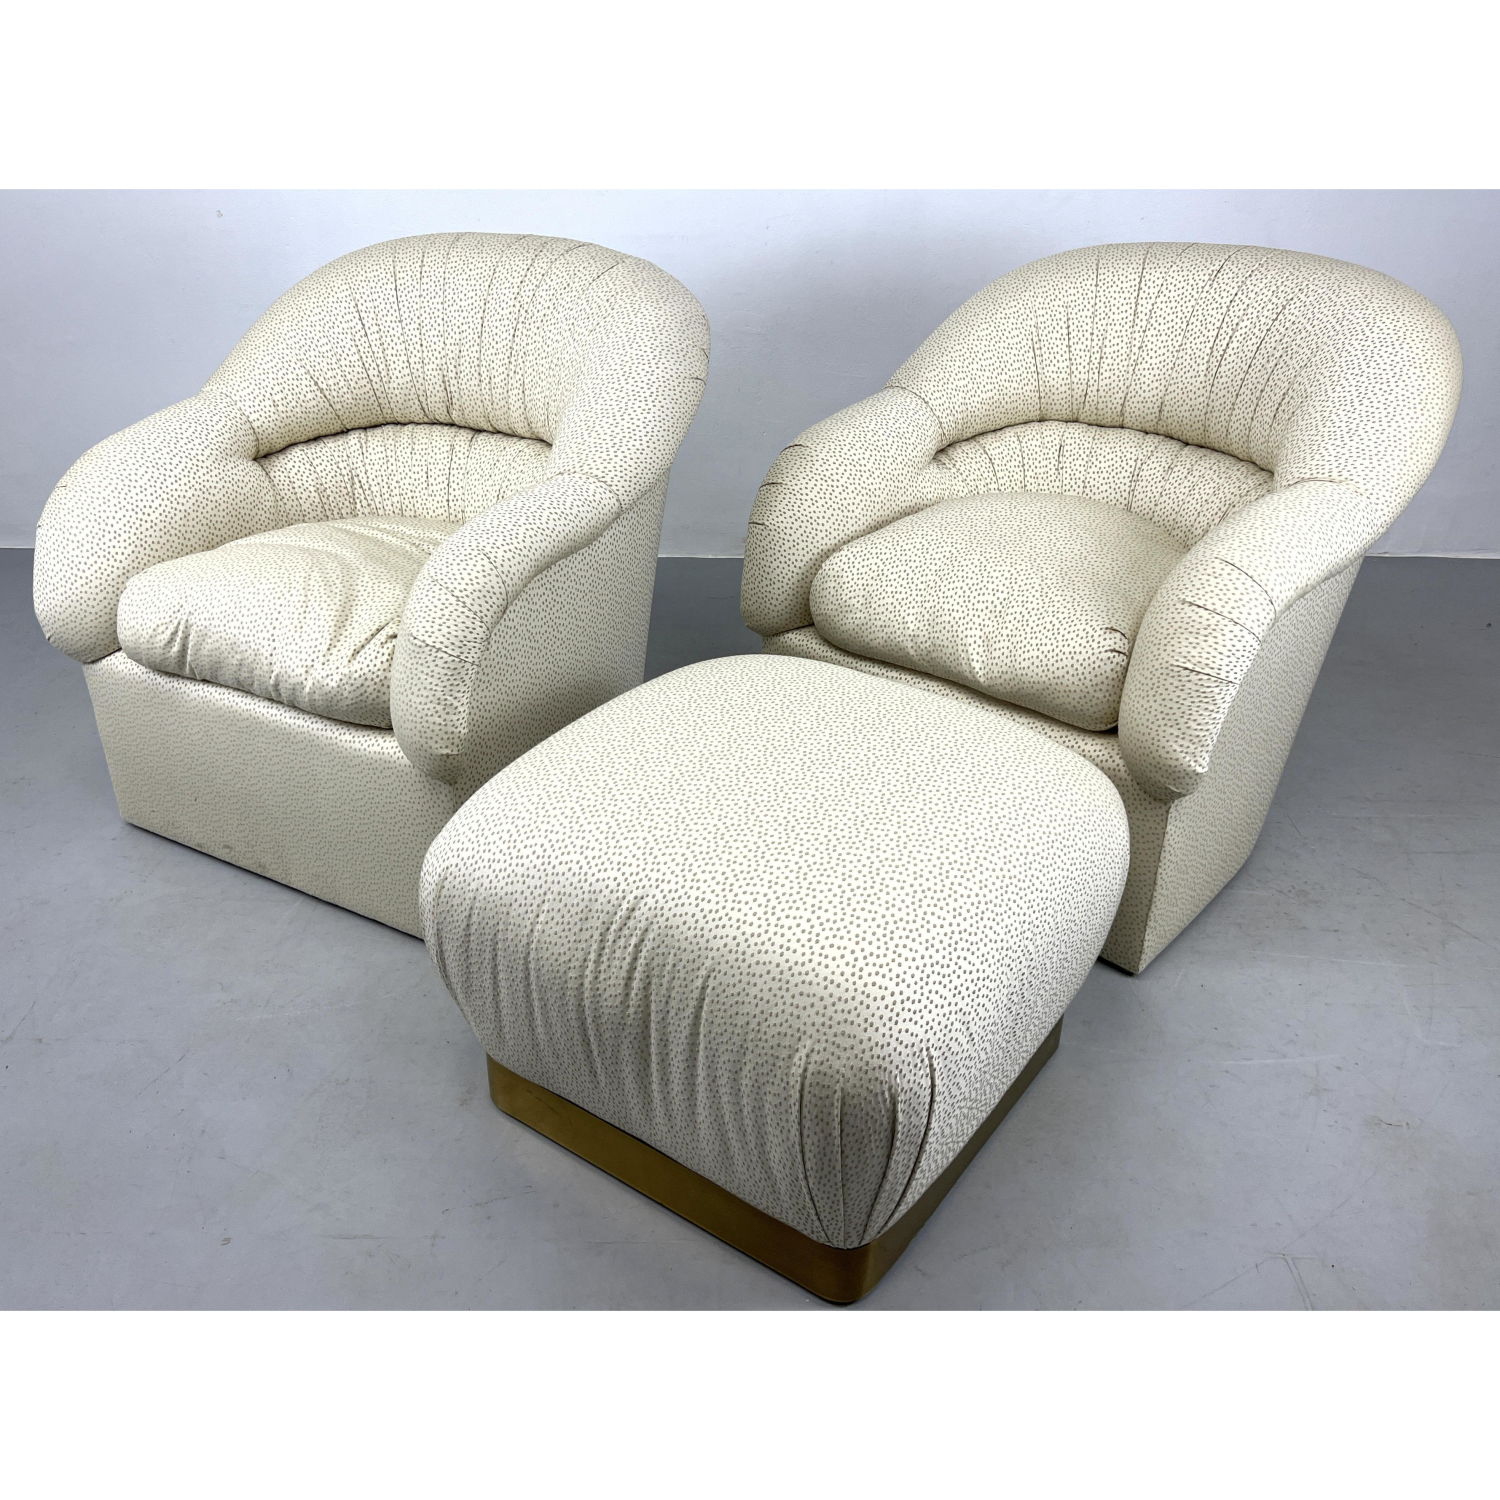 3pc Living room seating. Pair of